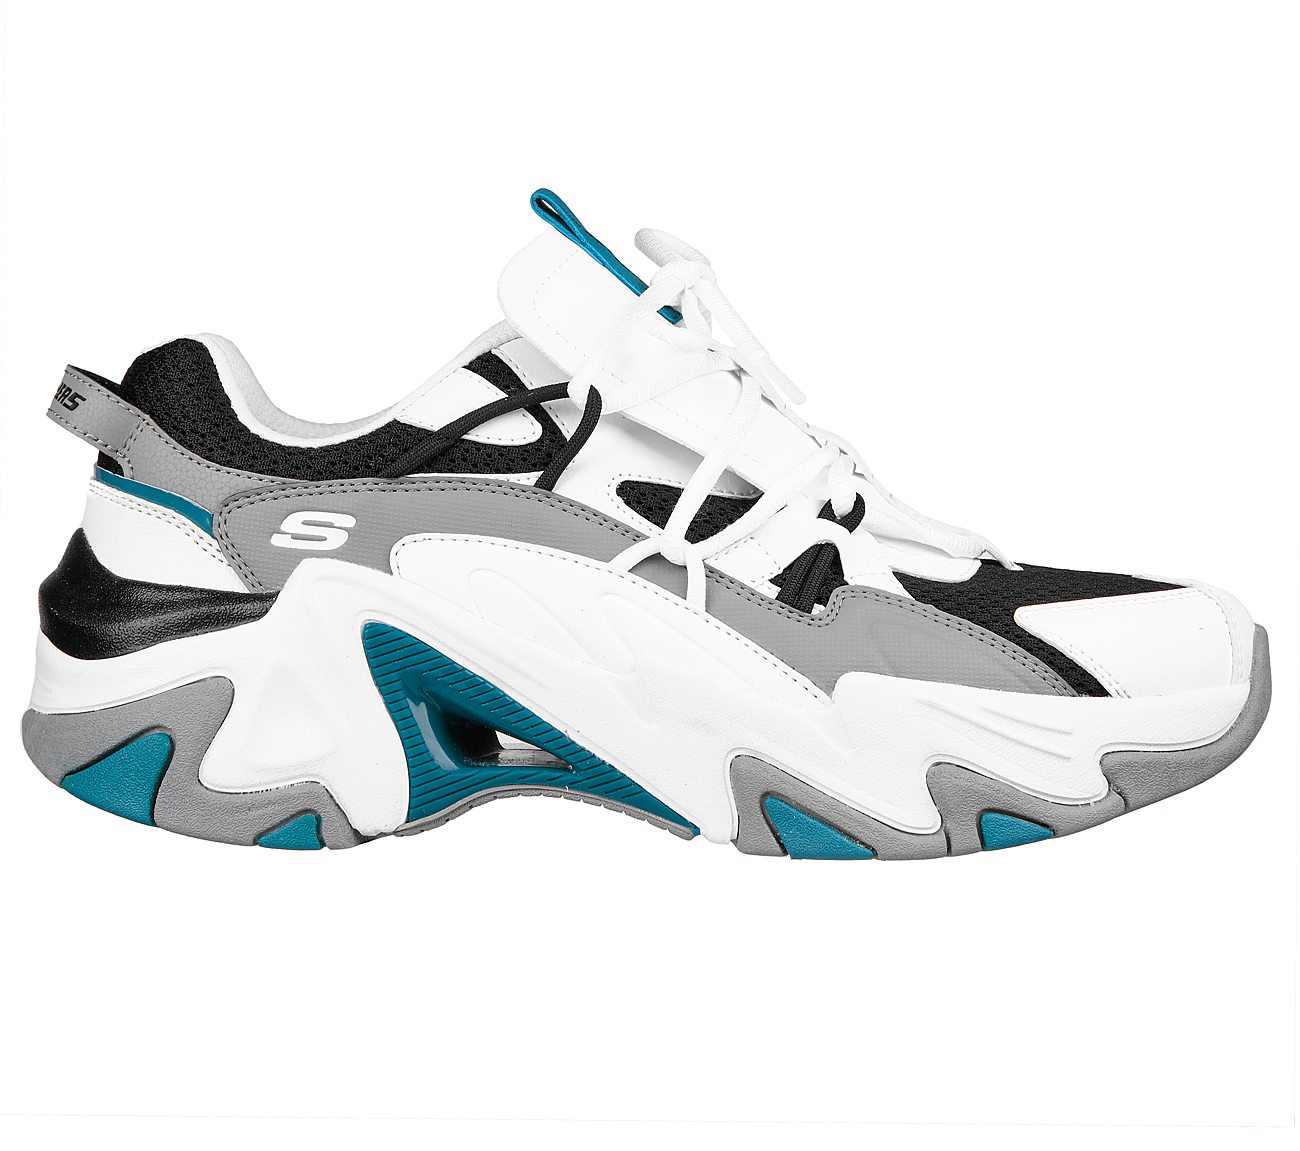 STAMINA V3, WWHITE/MINT Footwear Lateral View